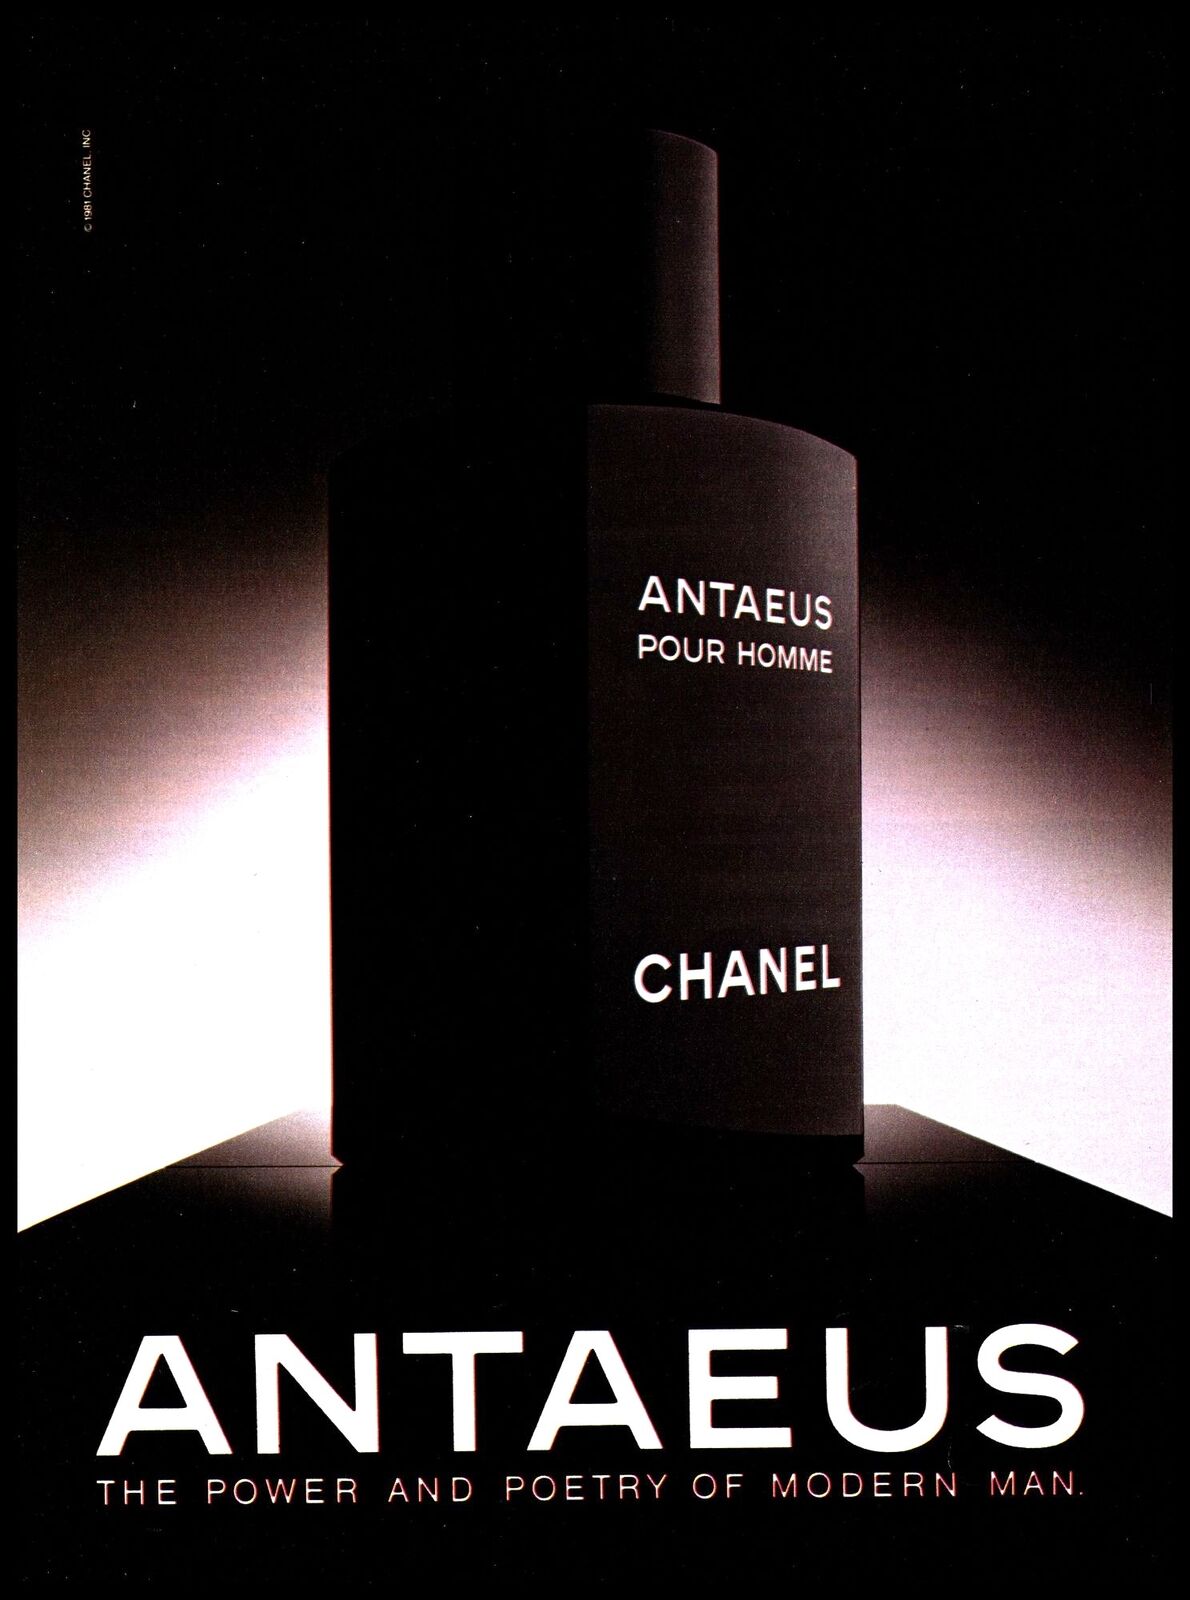 1981 Chanel Antaeus Cologne for Men Vintage Print Ad Power and Poetry Wall Art